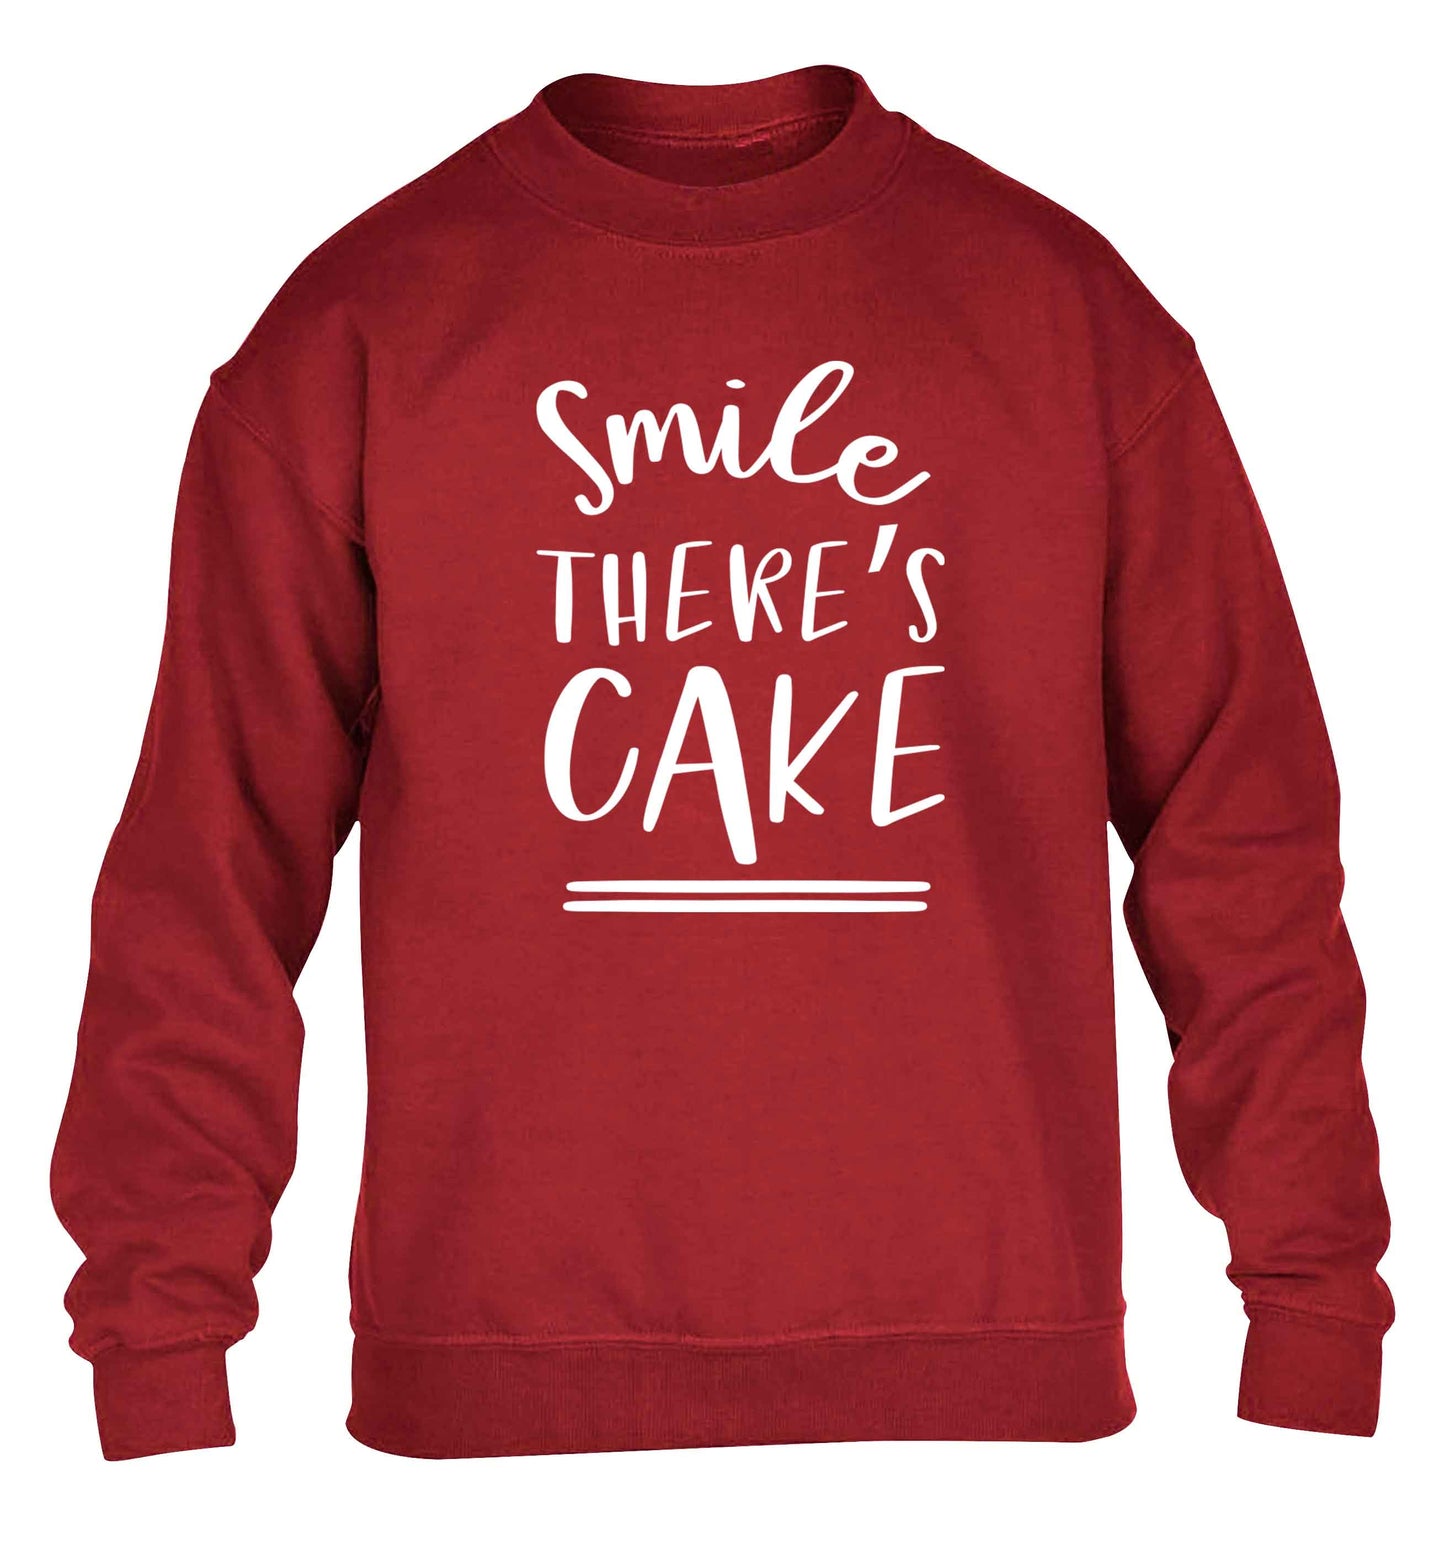 Smile there's cake children's grey sweater 12-13 Years